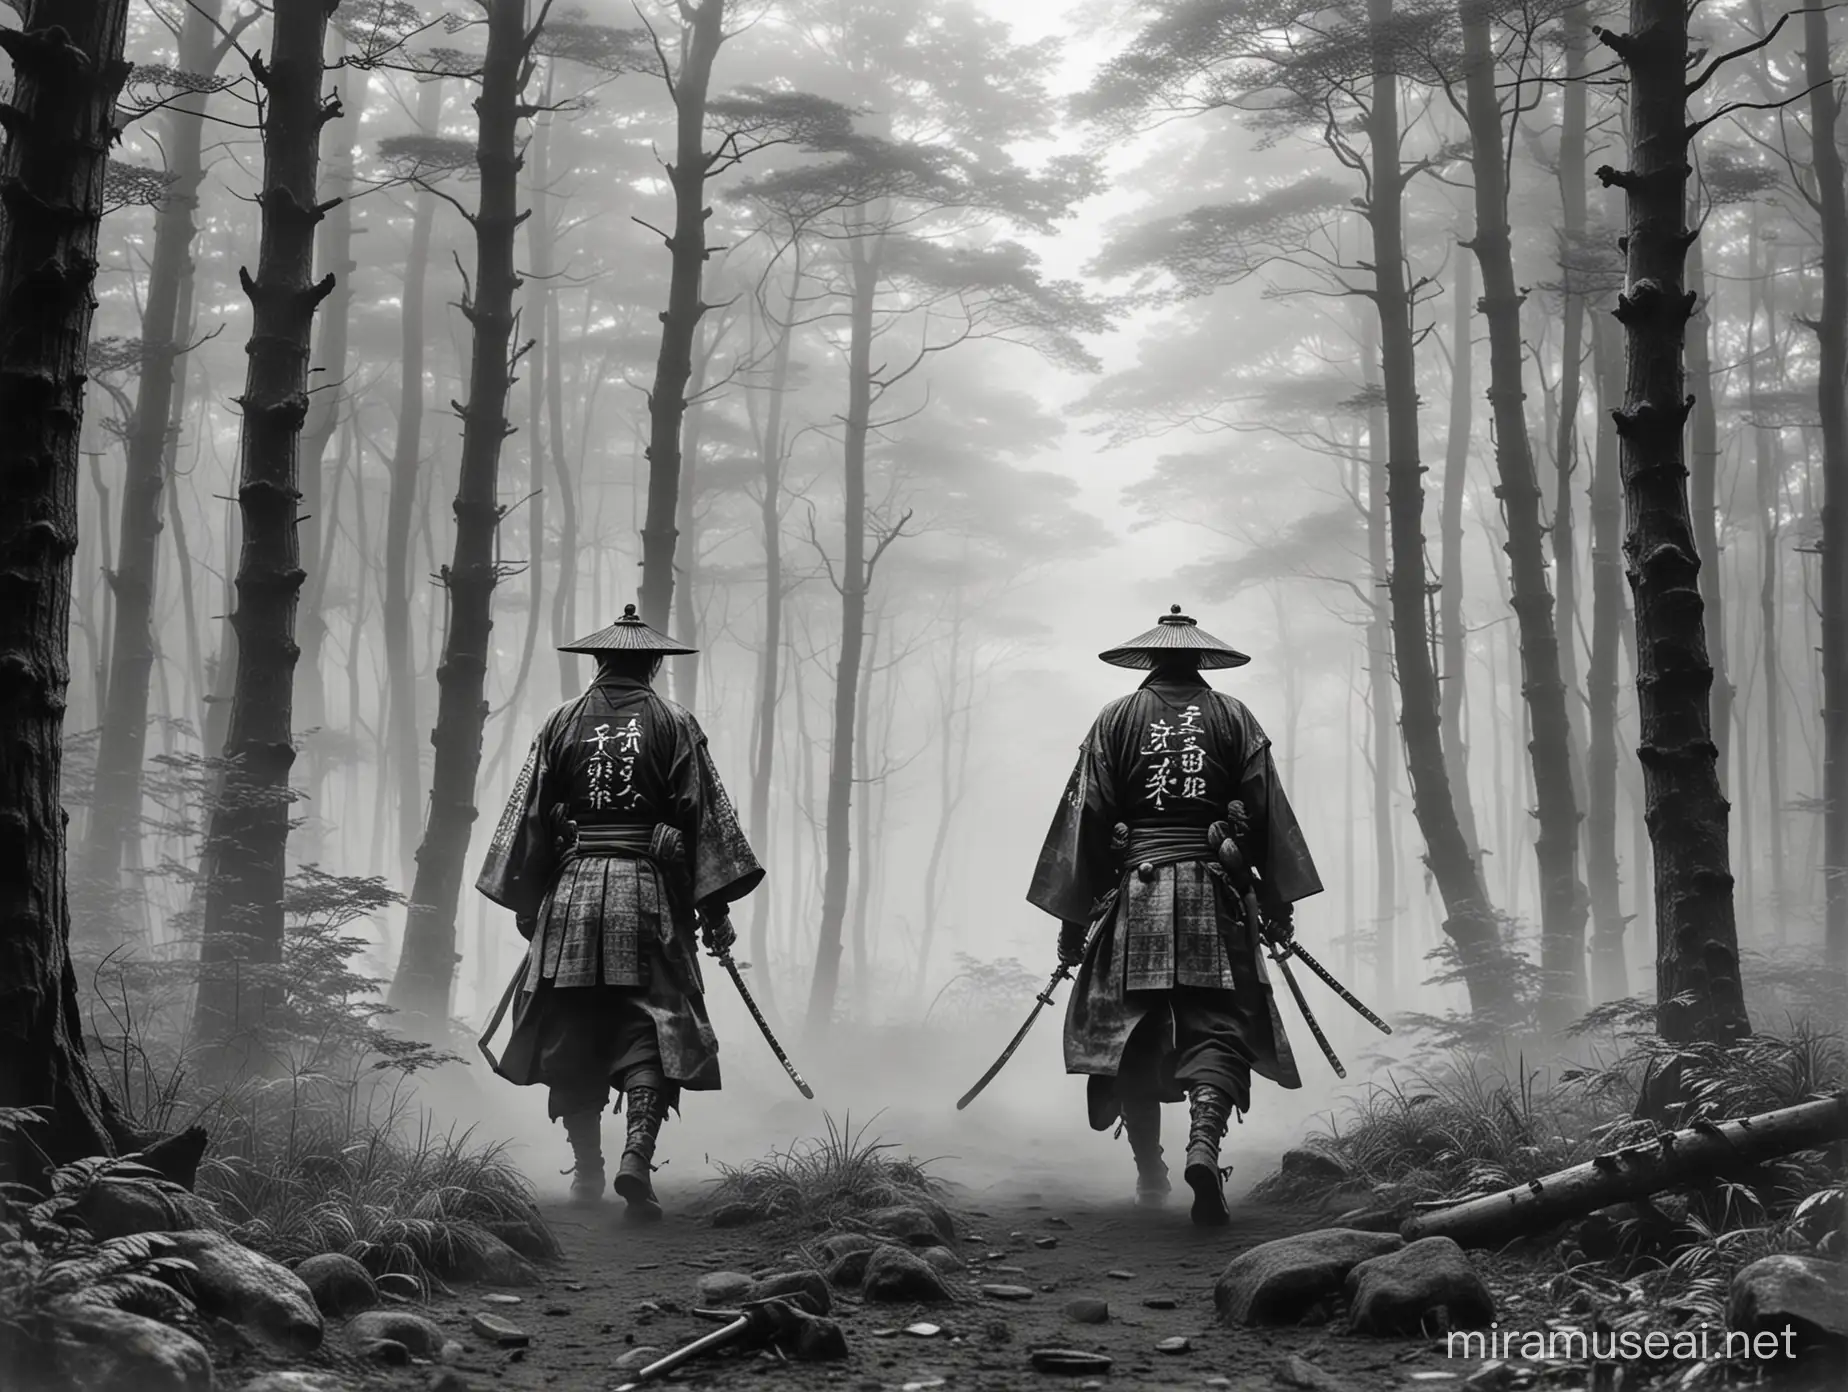 Mysterious Samurai Amidst Enigmatic Foggy Forest with Japanese Characters